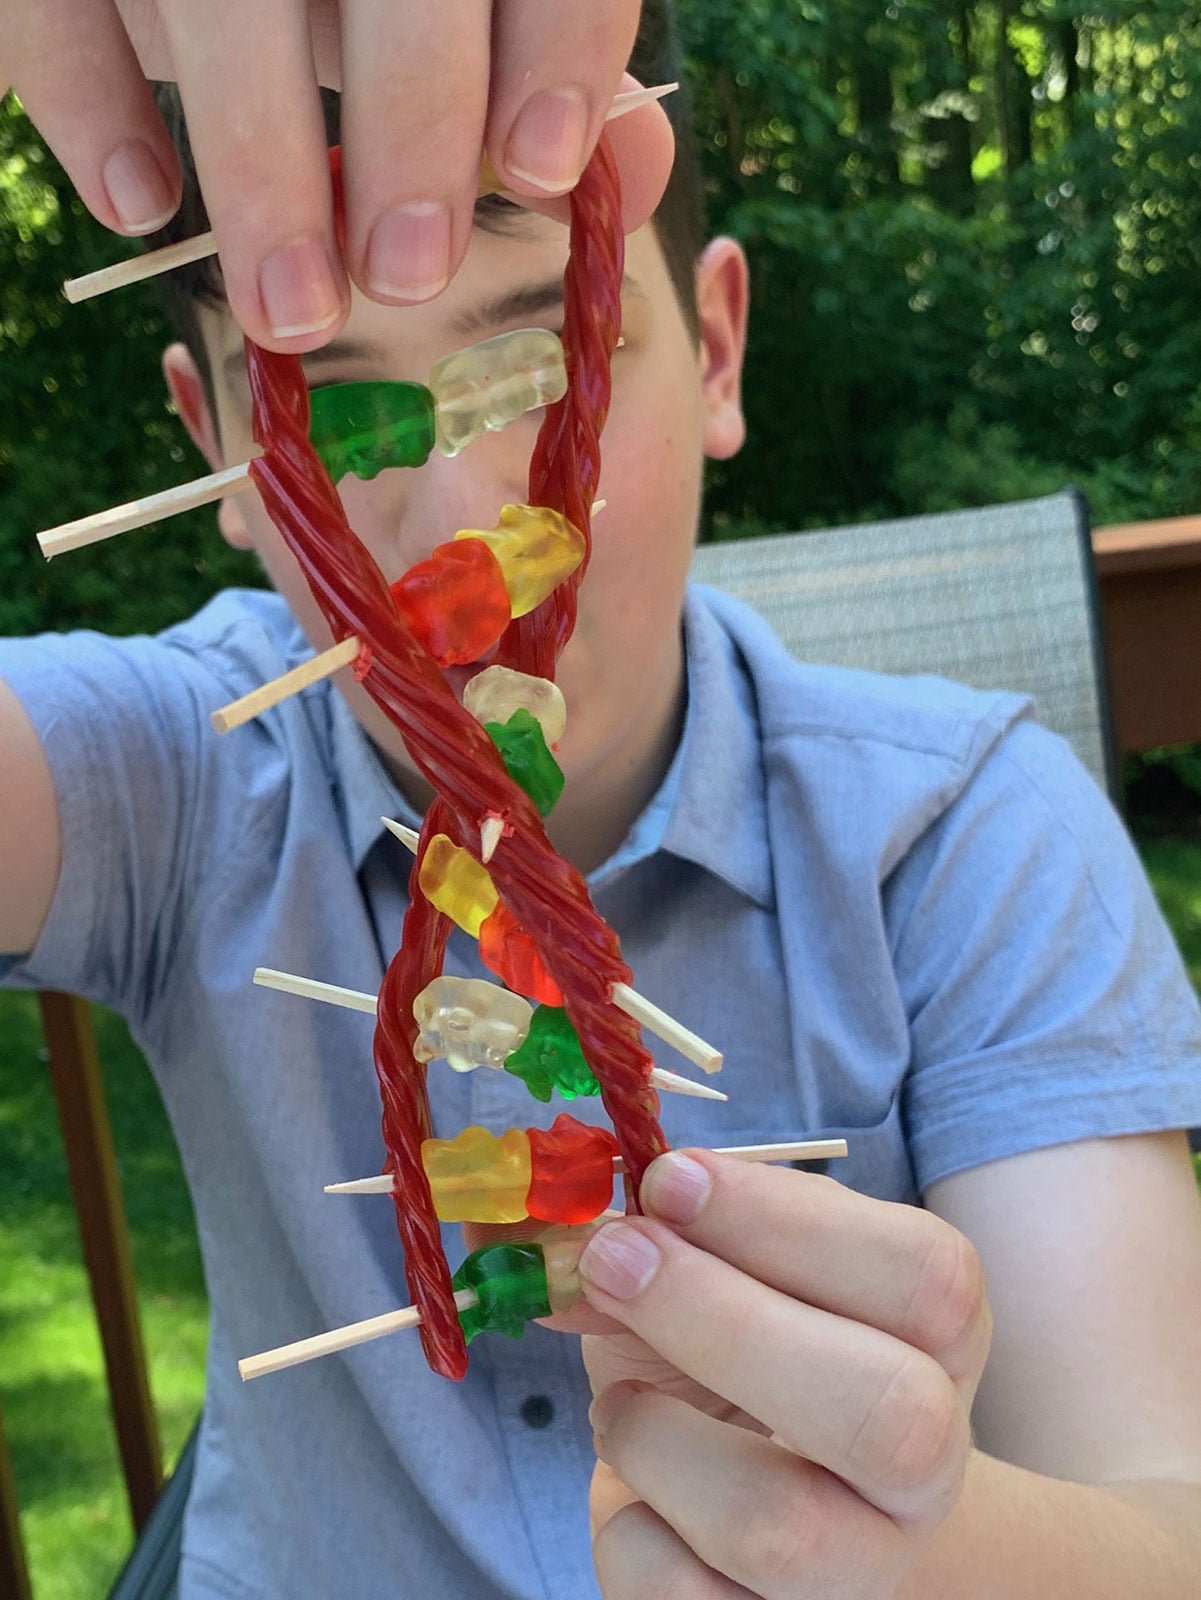 A young man gently twists a model of twizzlers, toothpicks, and gumy bears to form the classic double helix shape of coiled DNA